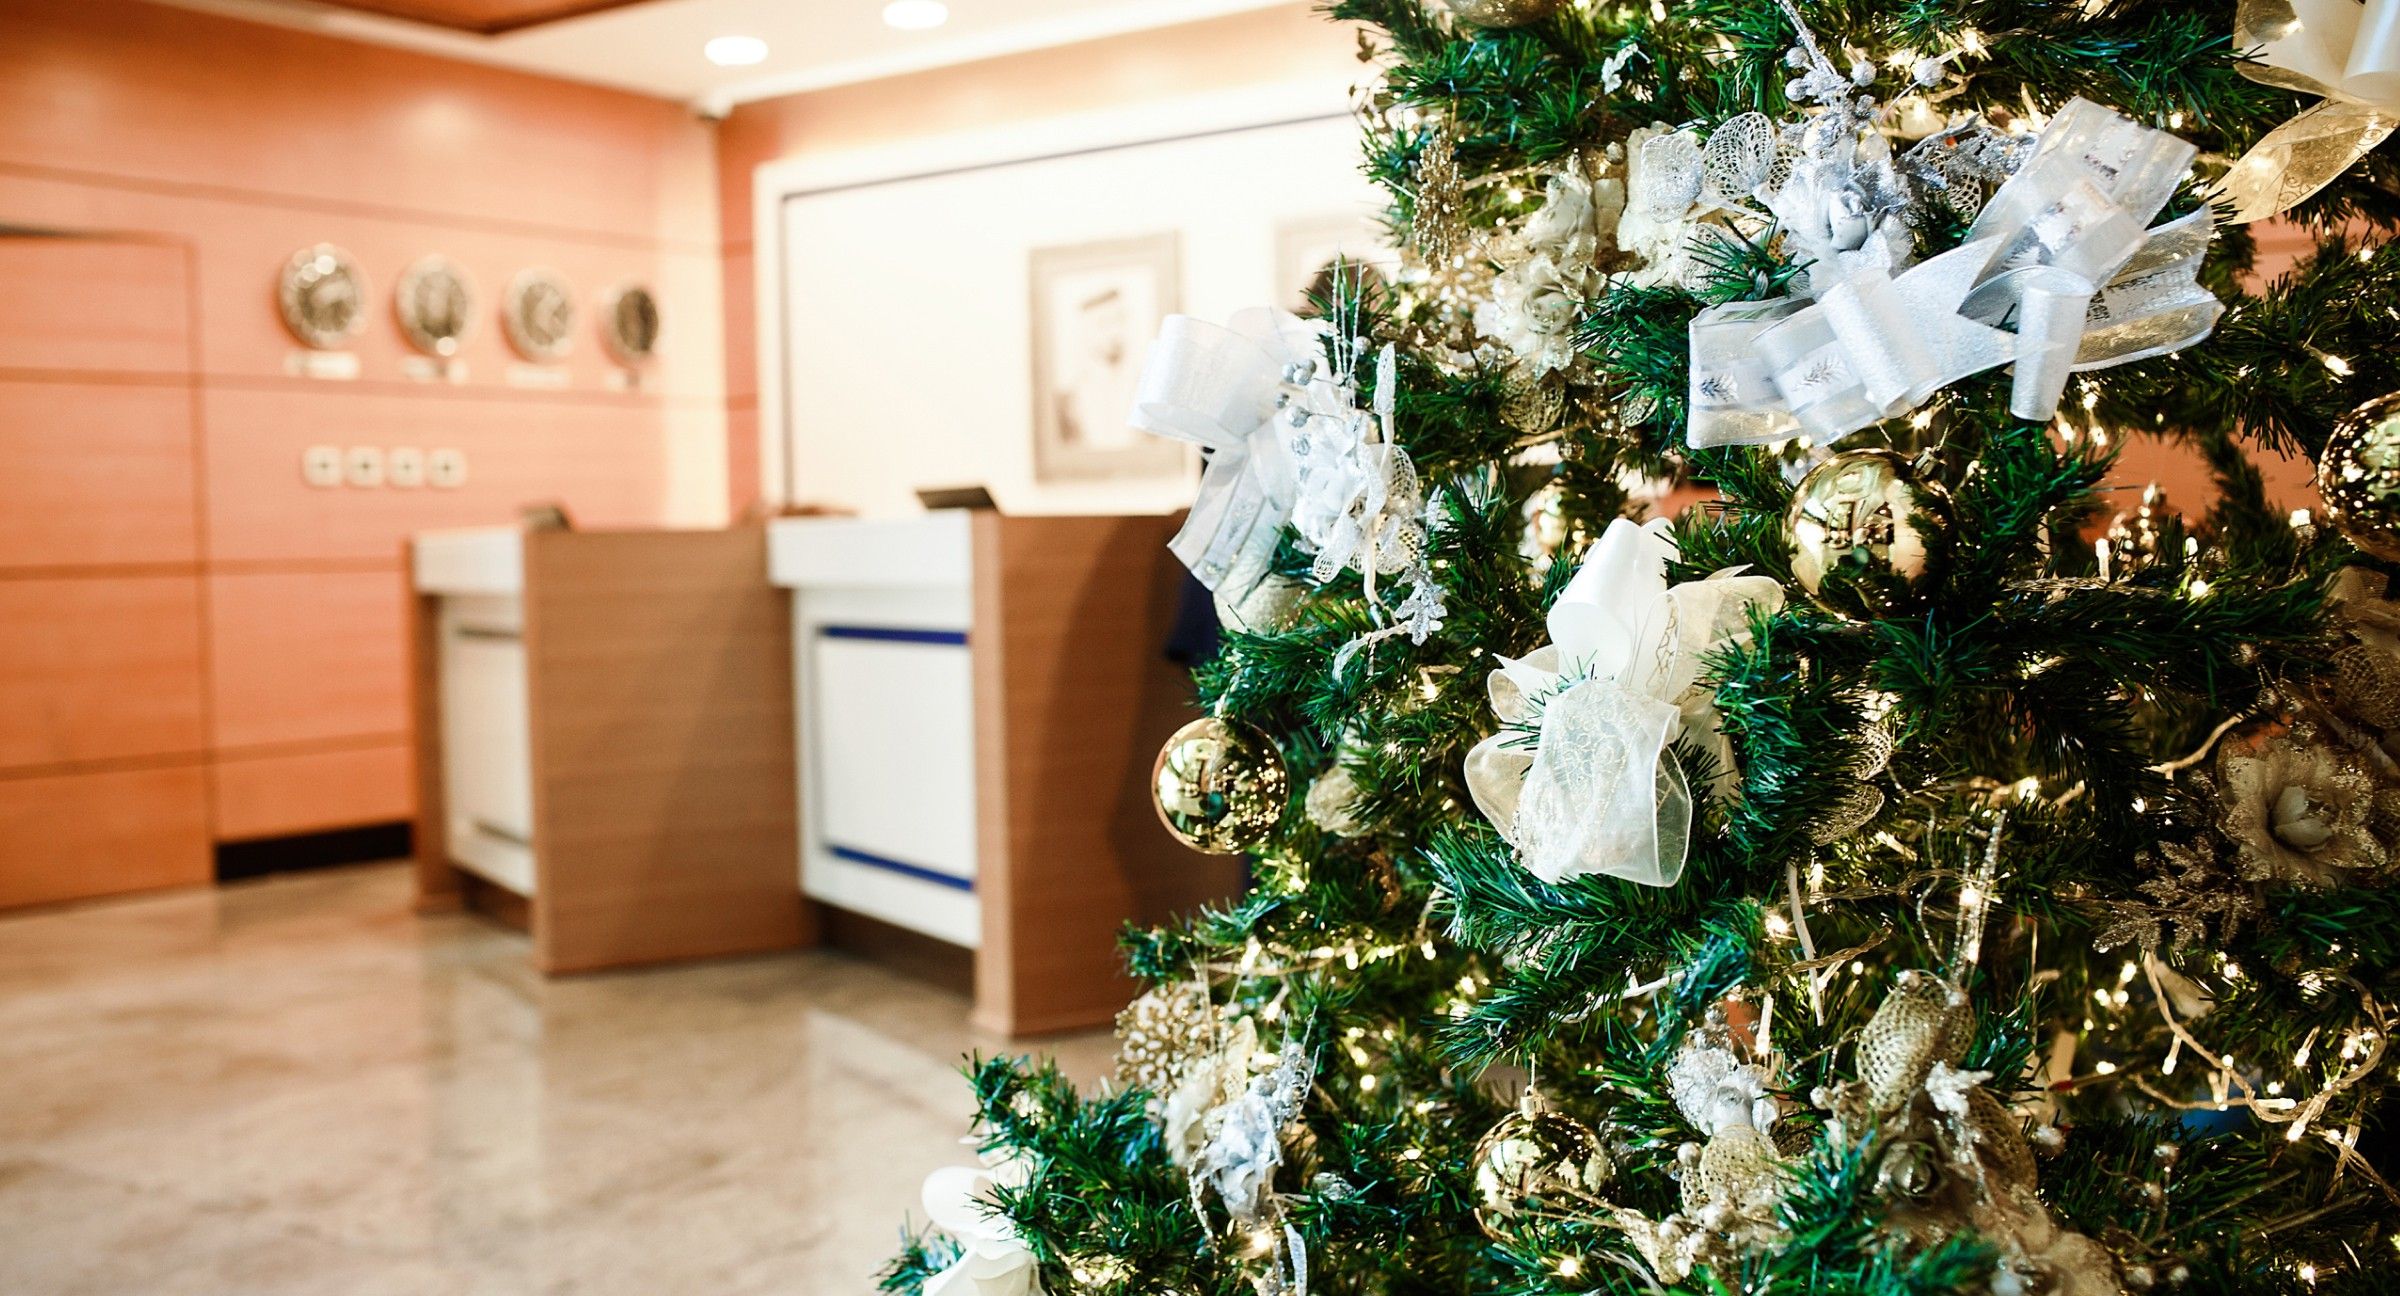 The holidays are an opportunity for your hotel to embrace festive marketing strategies. Read on for 5 tips to boost your hotel sales during the holidays. Keyword Focus: boost hotel sales, boost hotel sales during holidays